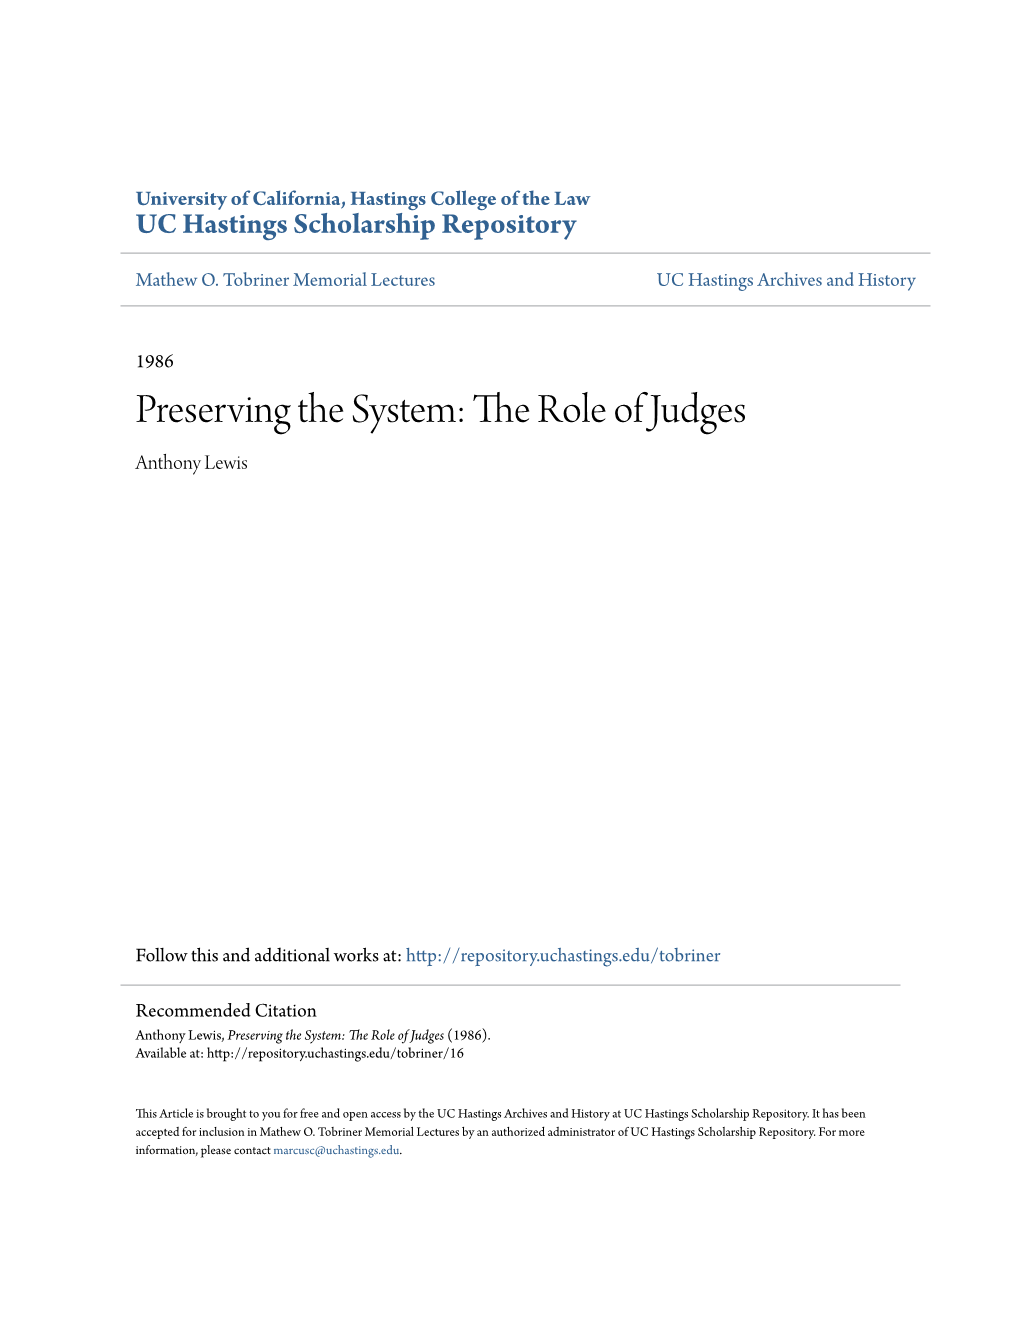 The Role of Judges Anthony Lewis